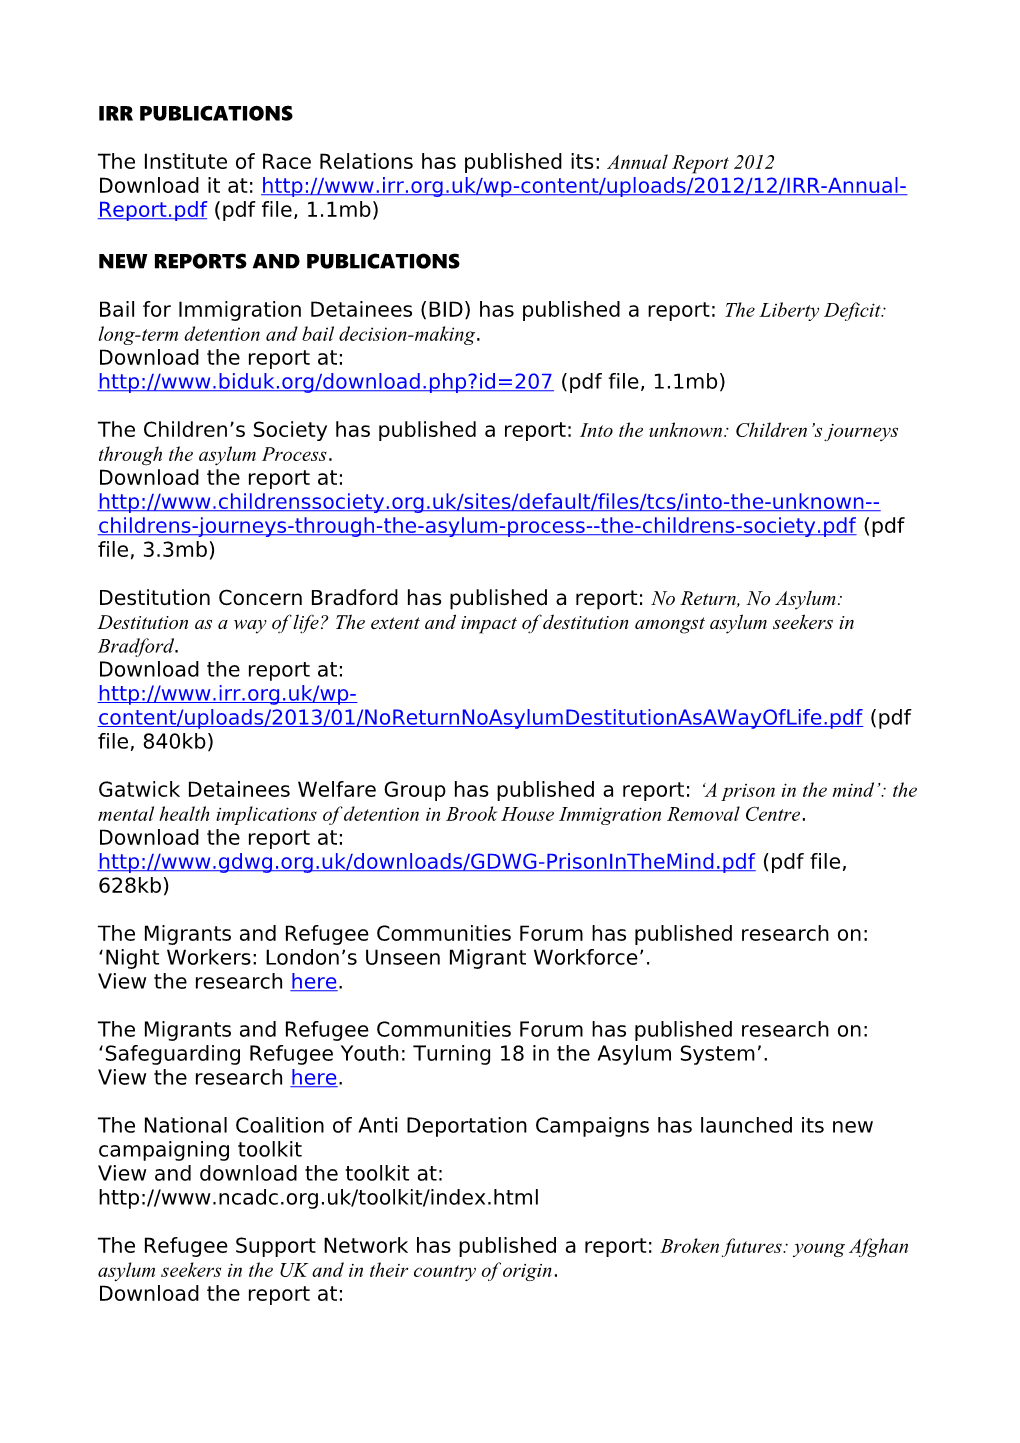 The Institute of Race Relations Has Published Its: Annual Report 2012